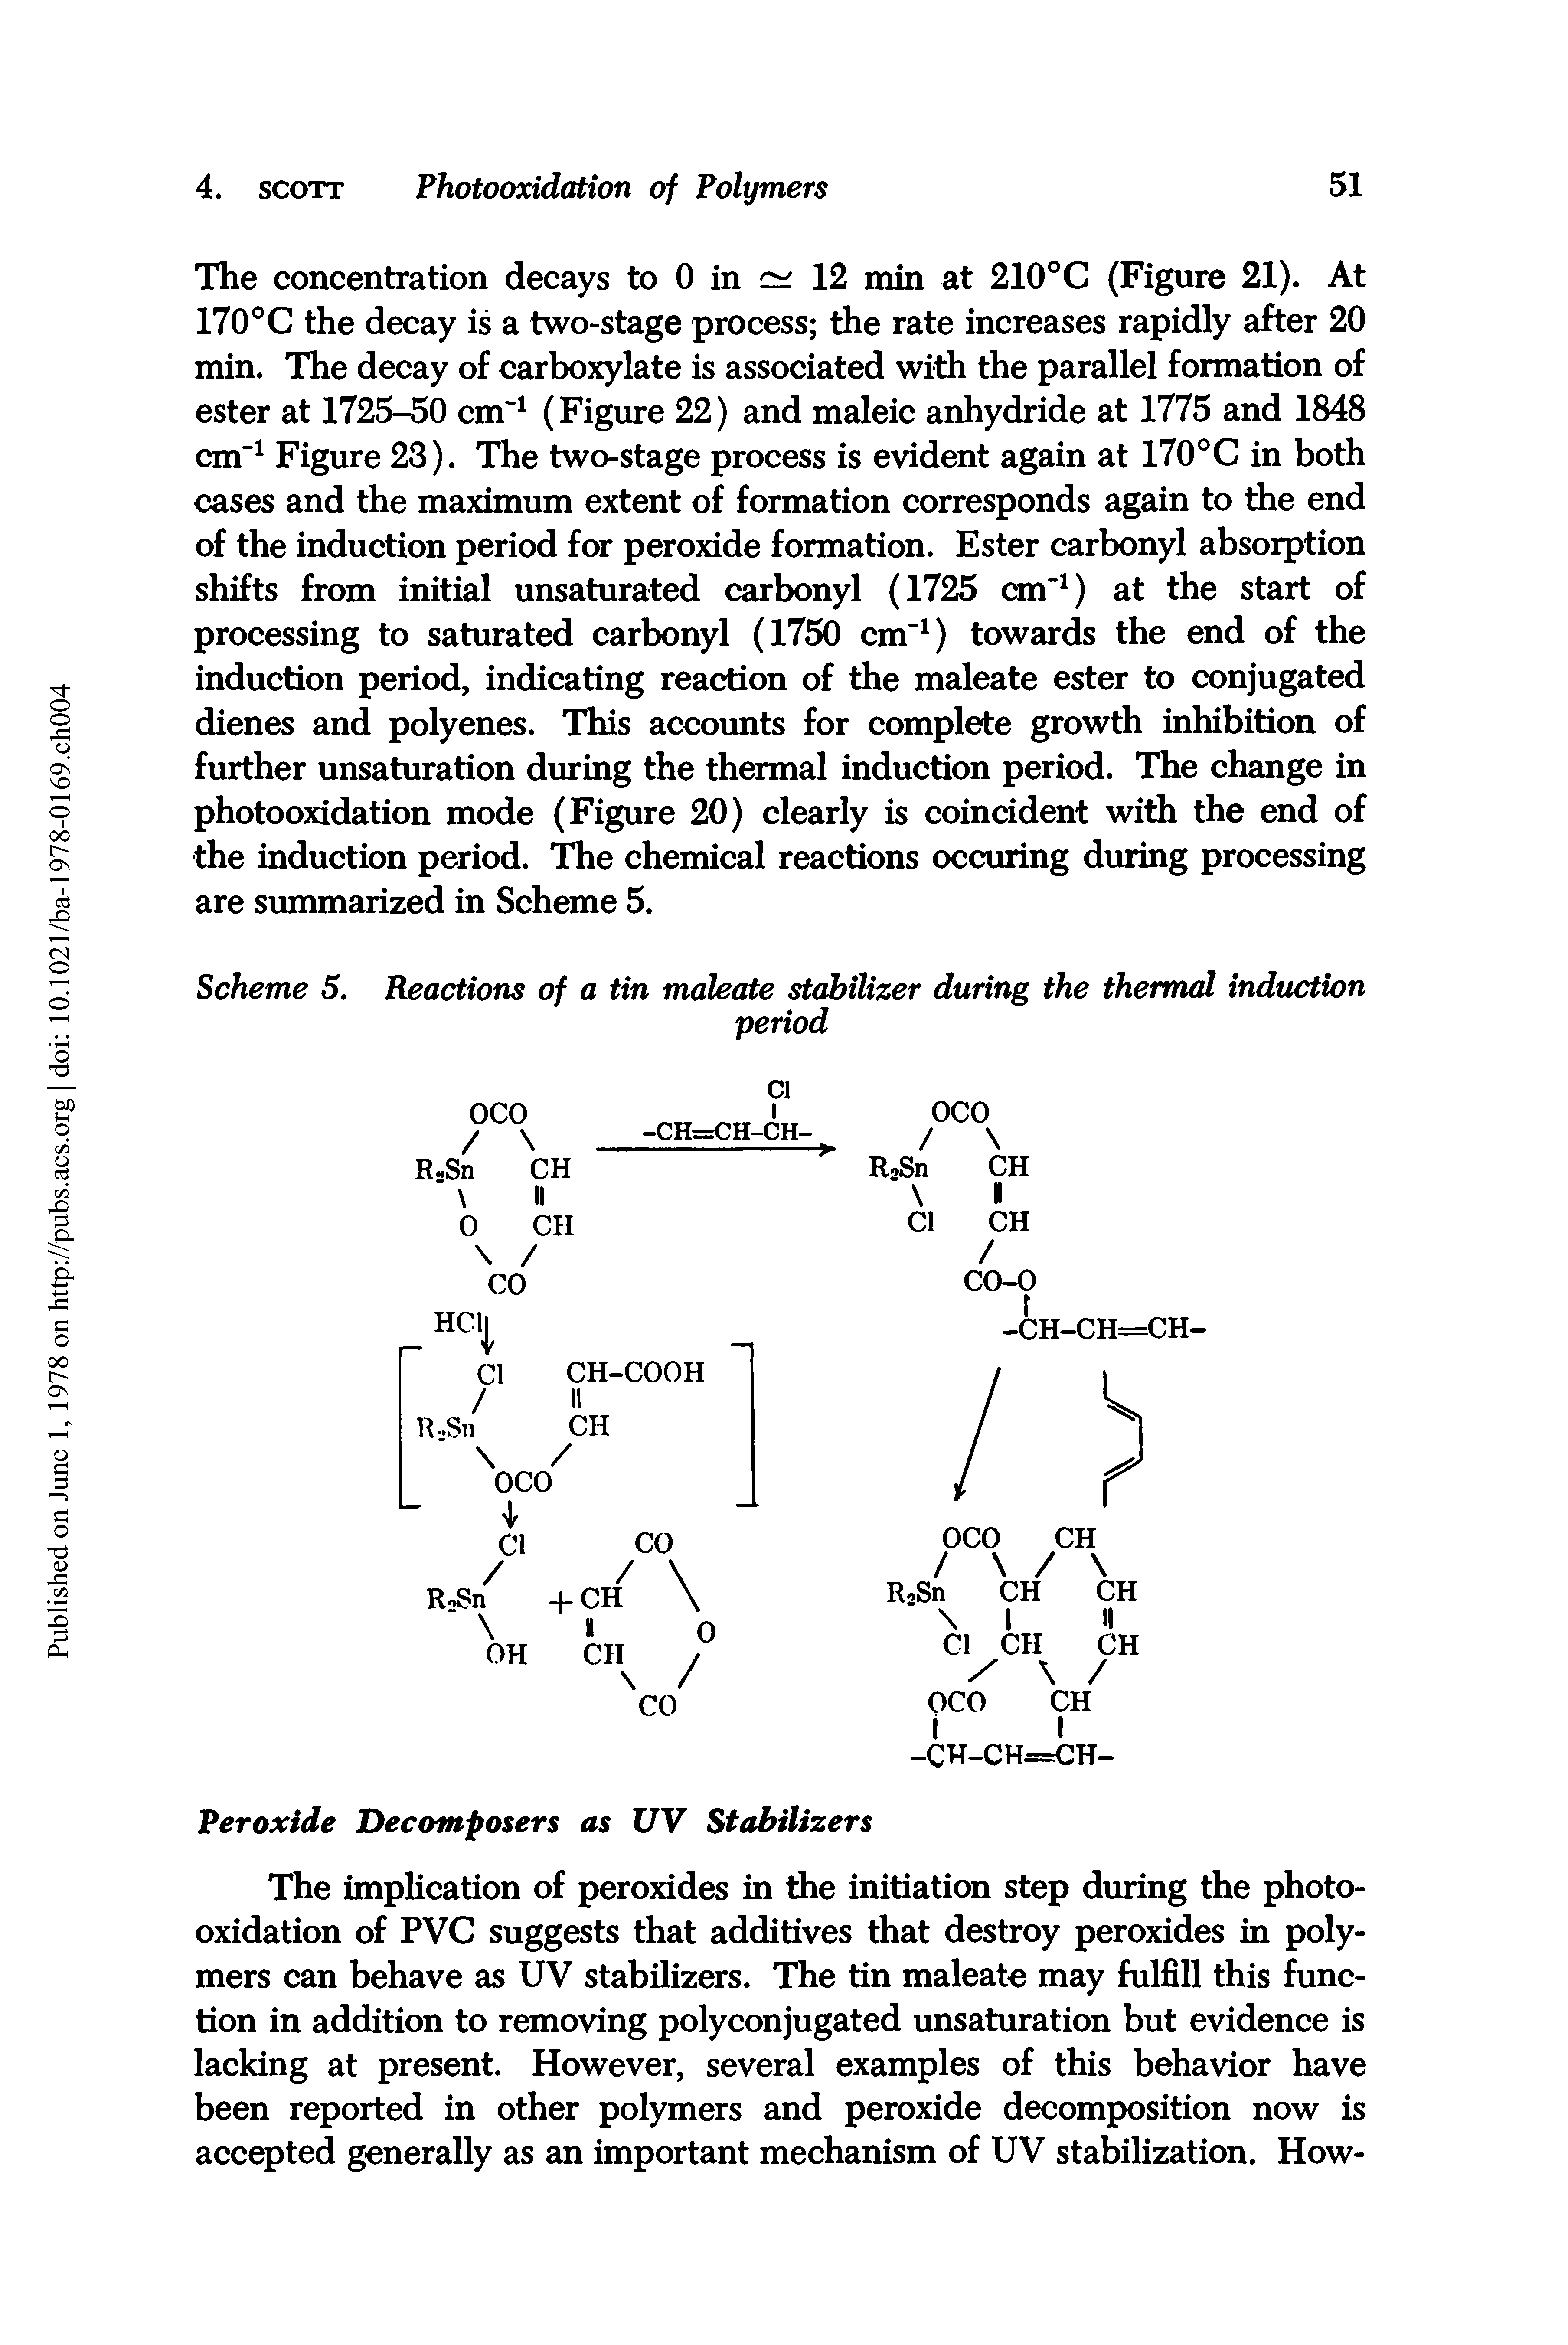 Scheme 5. Reactions of a tin maleate stabilizer during the thermal induction...